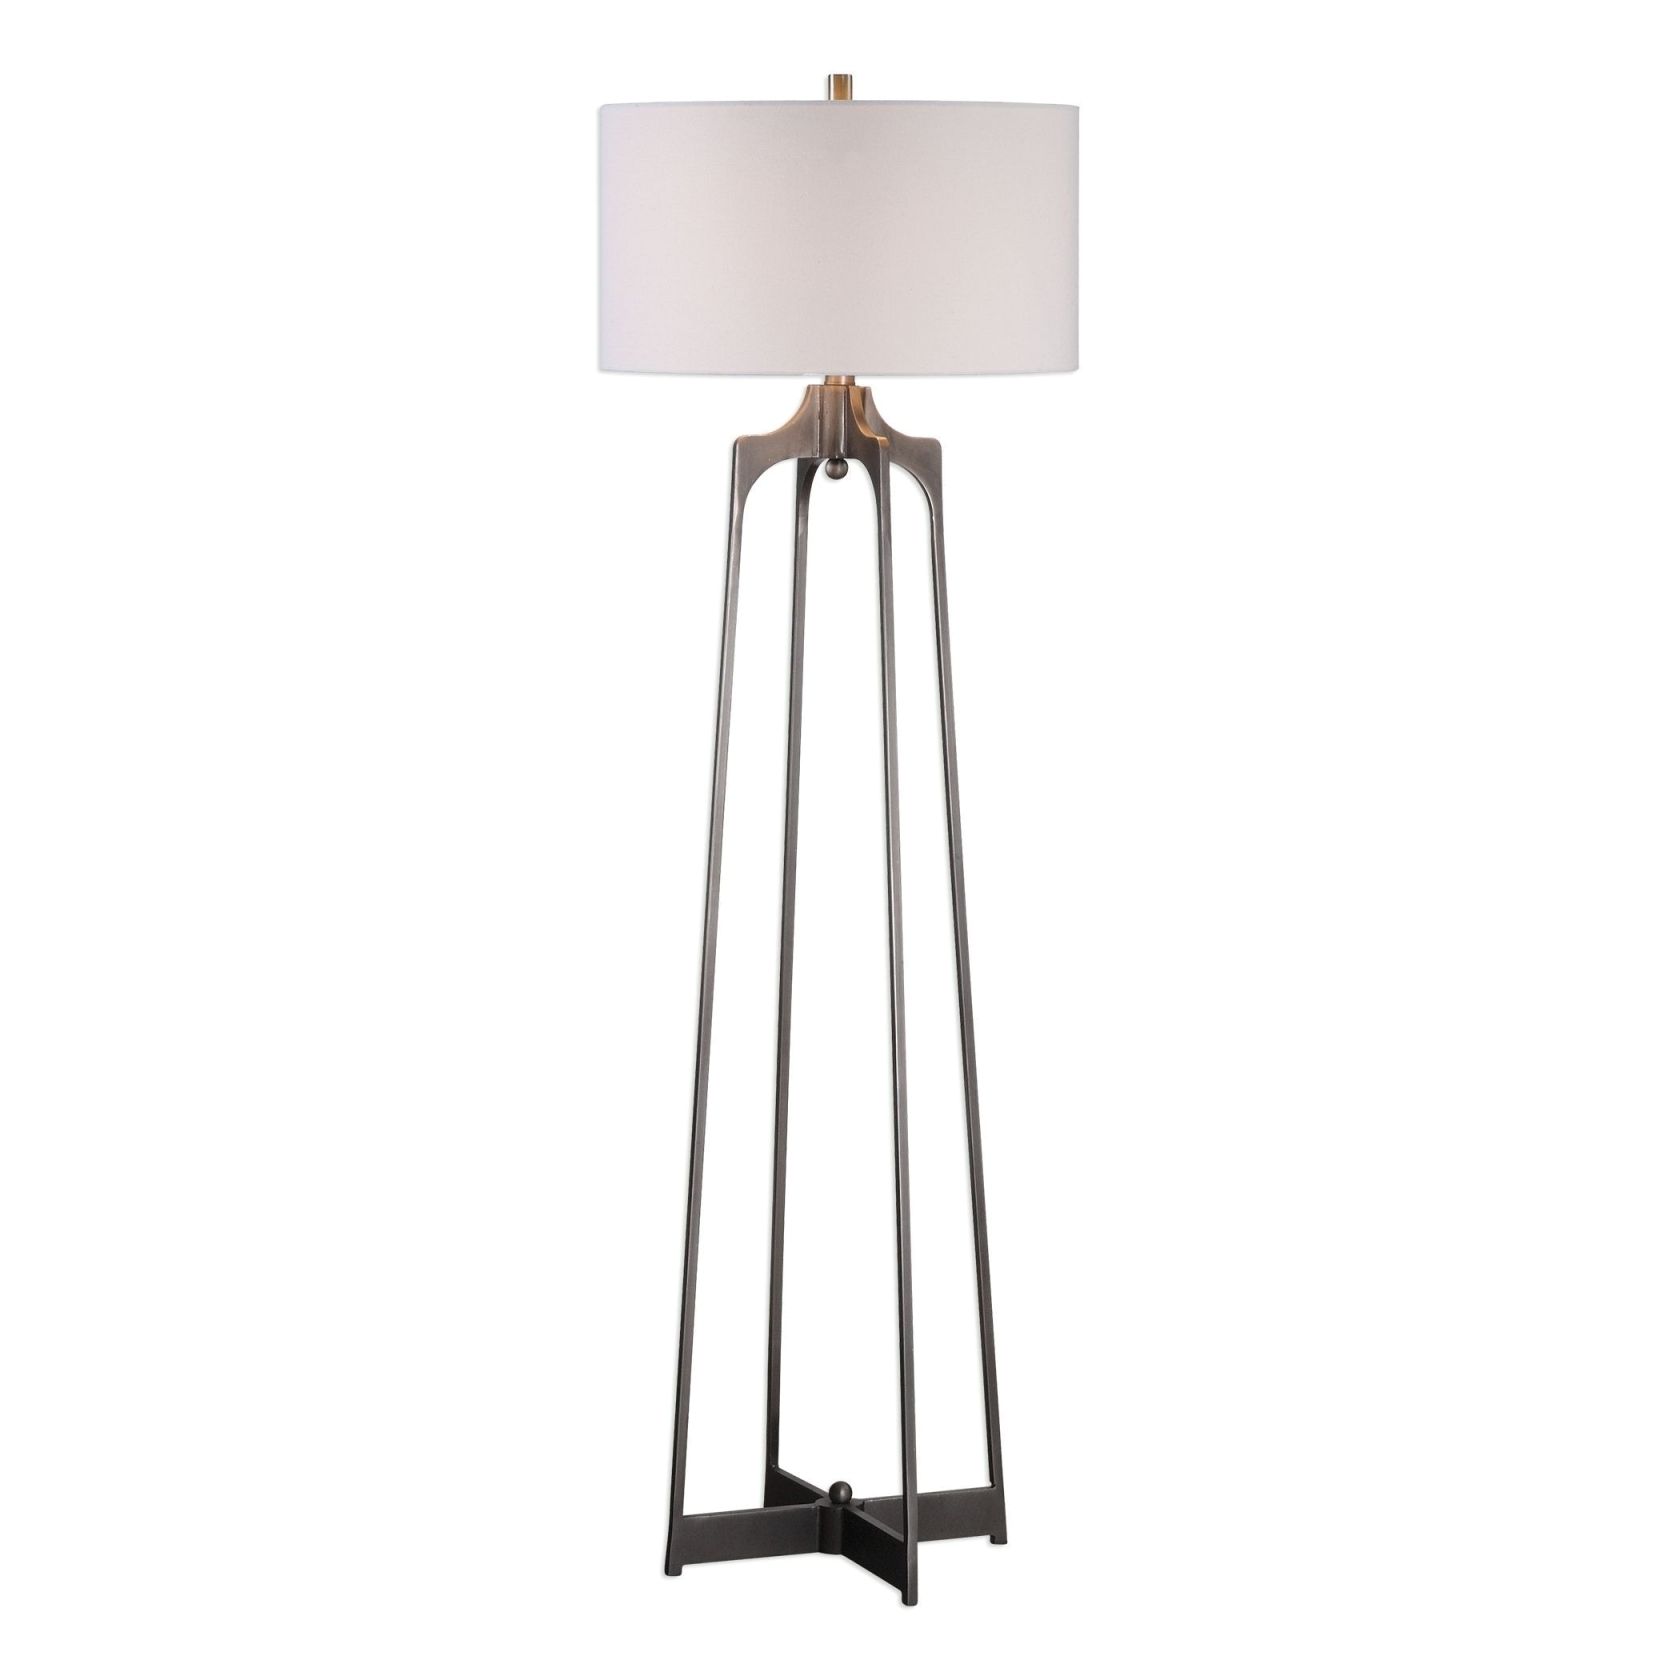 floor lamp awesome all modern floor lamps best lamps cottage lamps cottage lamps 0d